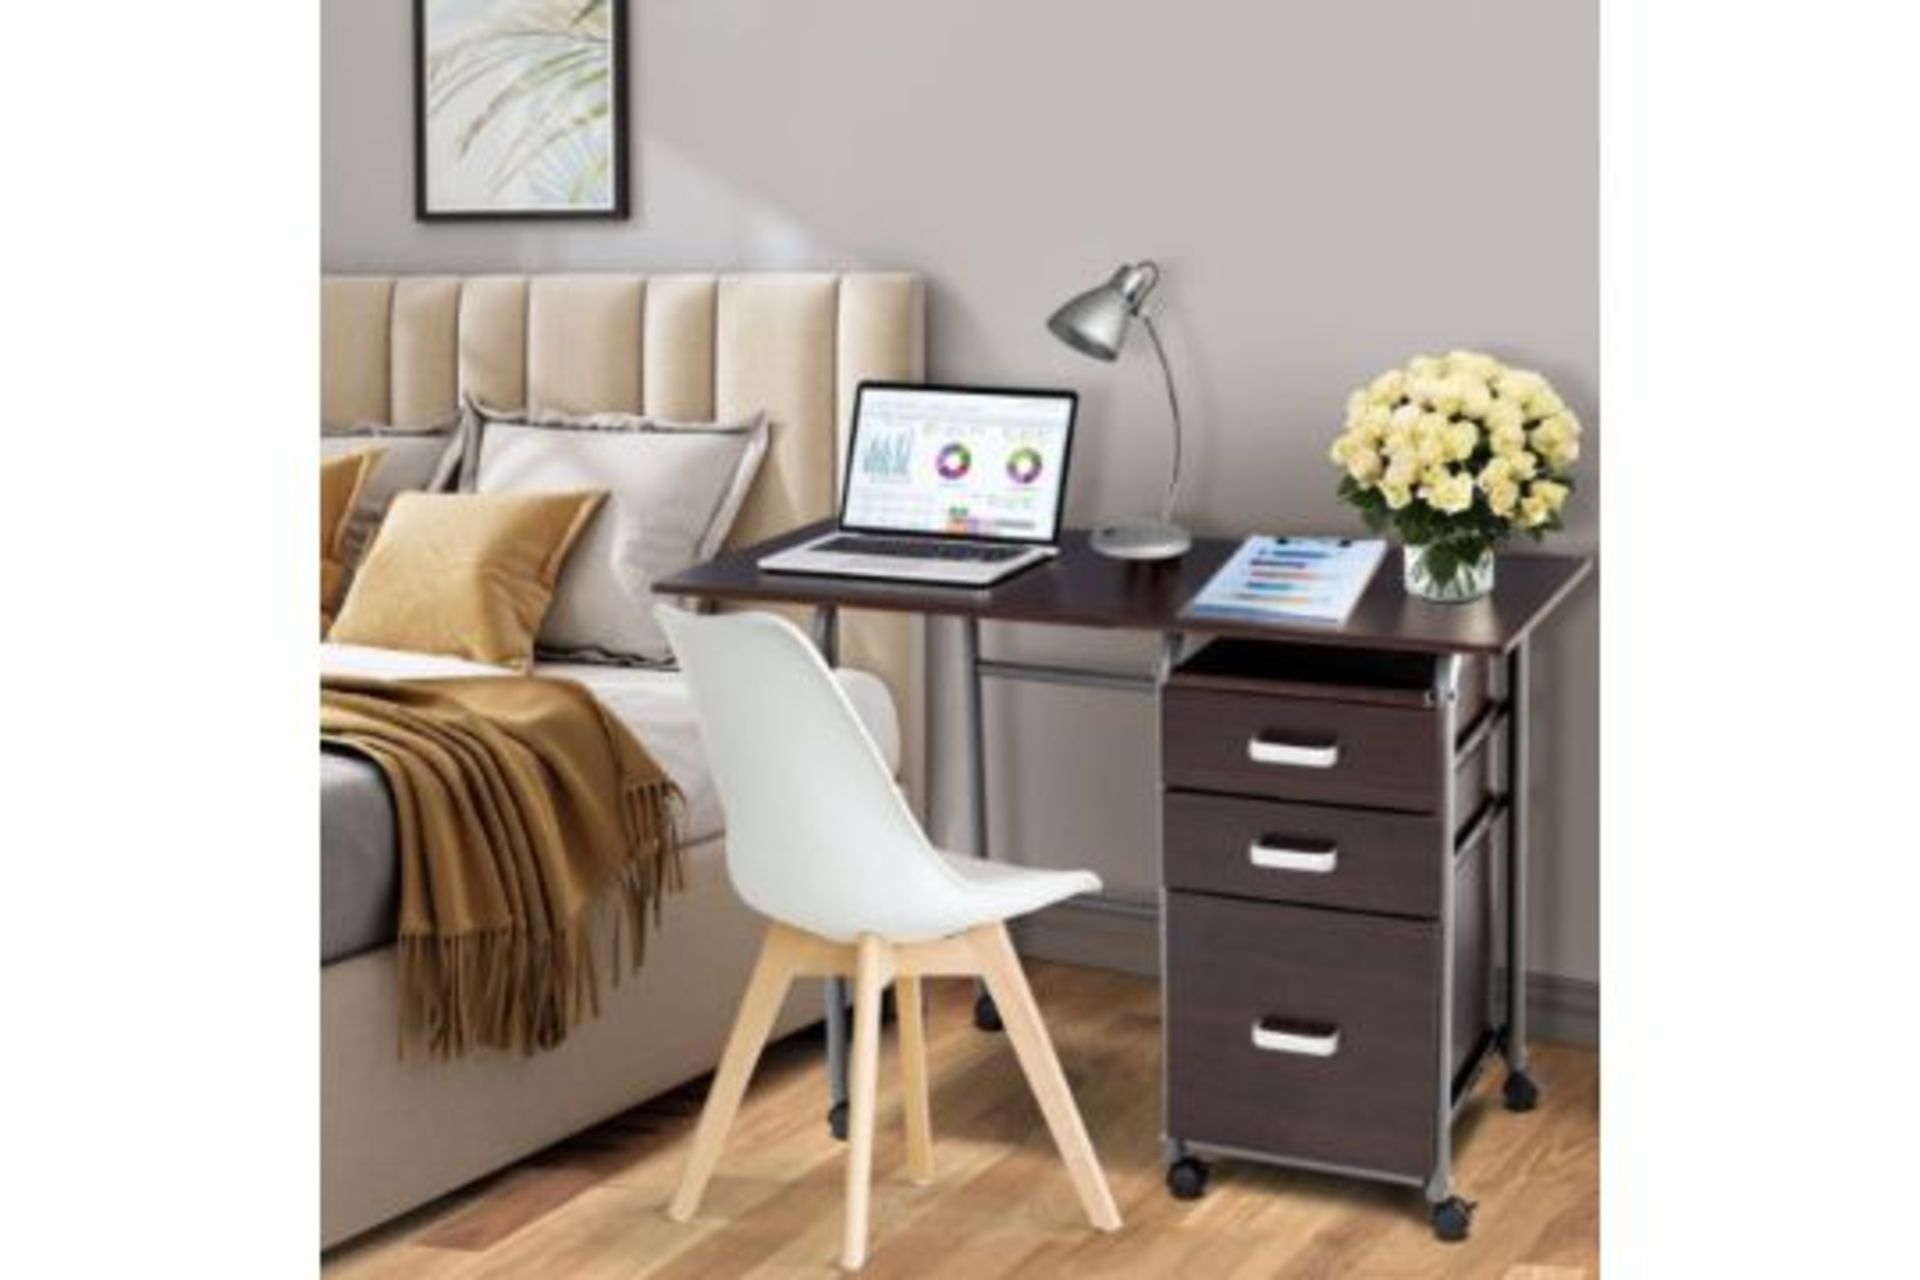 Folding Computer Laptop Desk Wheeled Home Office Furniture-Brown. - R14.8. This is the folding